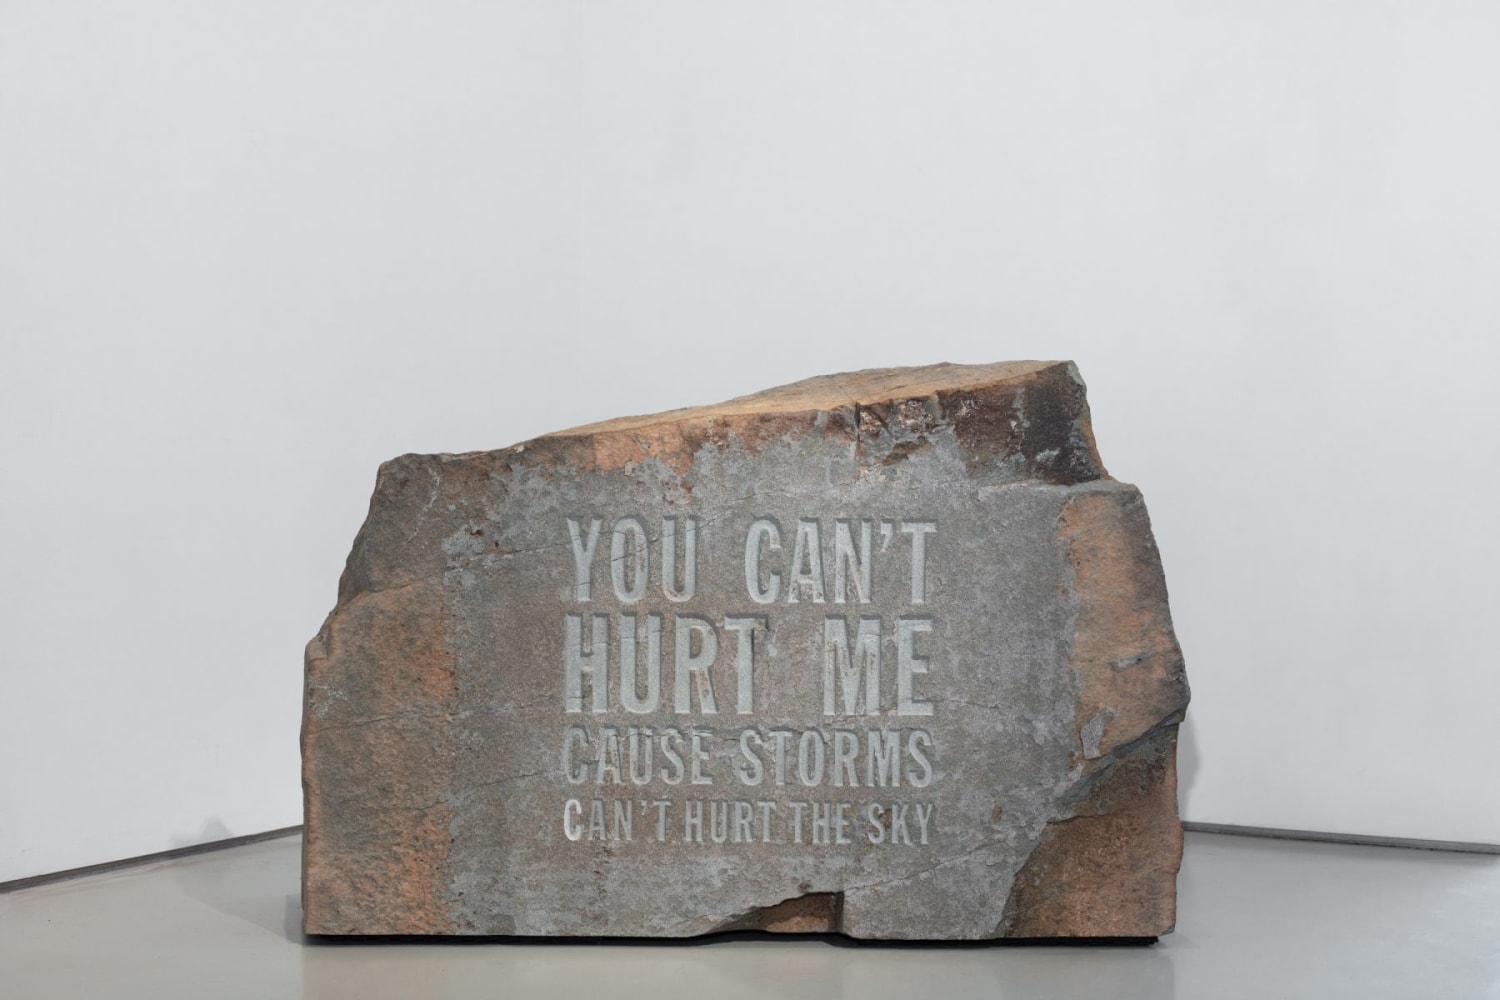 YOU CAN&amp;#39;T HURT ME CAUSE STORMS CAN&amp;#39;T HURT THE SKY, 2019
bluestone
36 1/4h x 56 1/2w x 18d in
Edition of 3